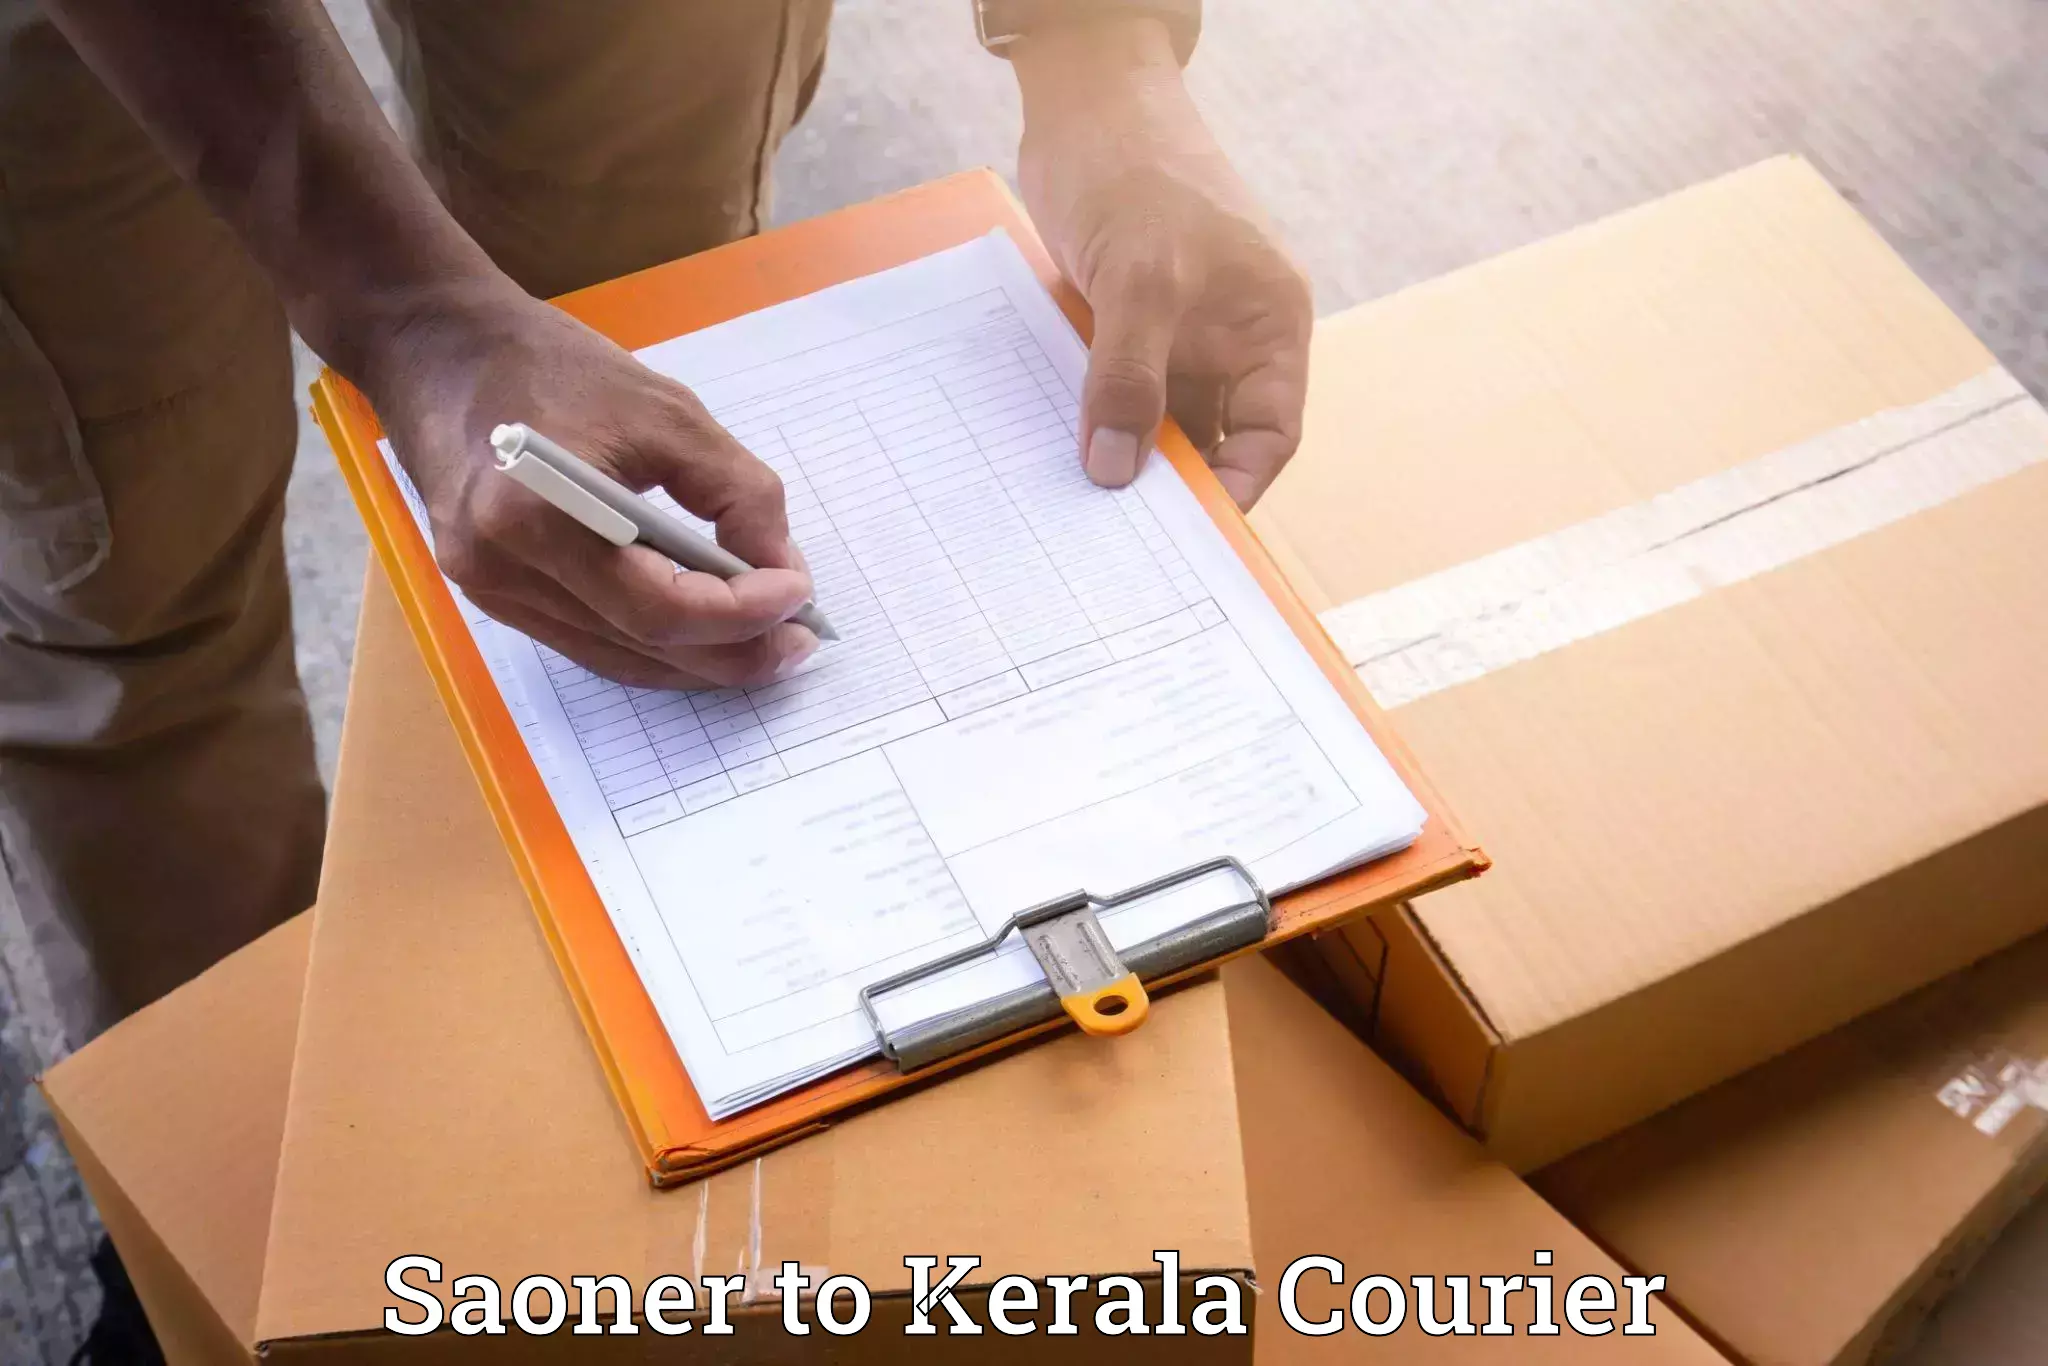 Furniture relocation services Saoner to Kochi